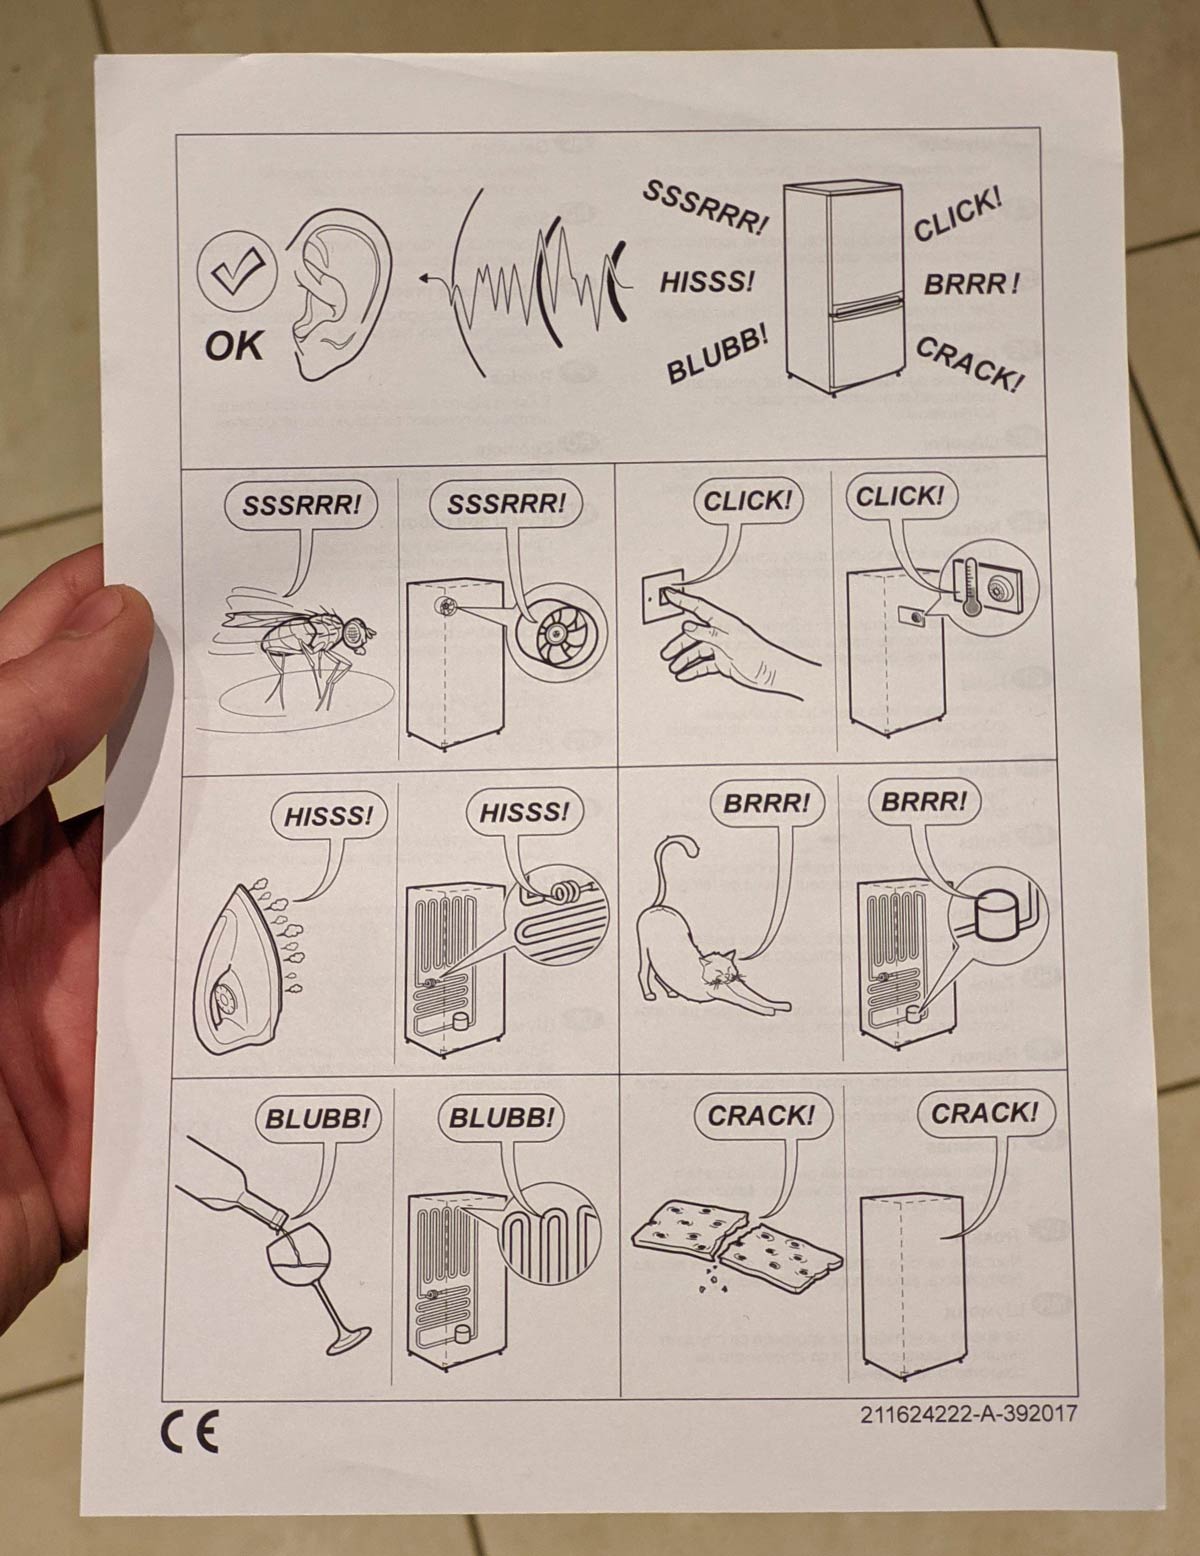 Our fridge came with a description of the noises it might make